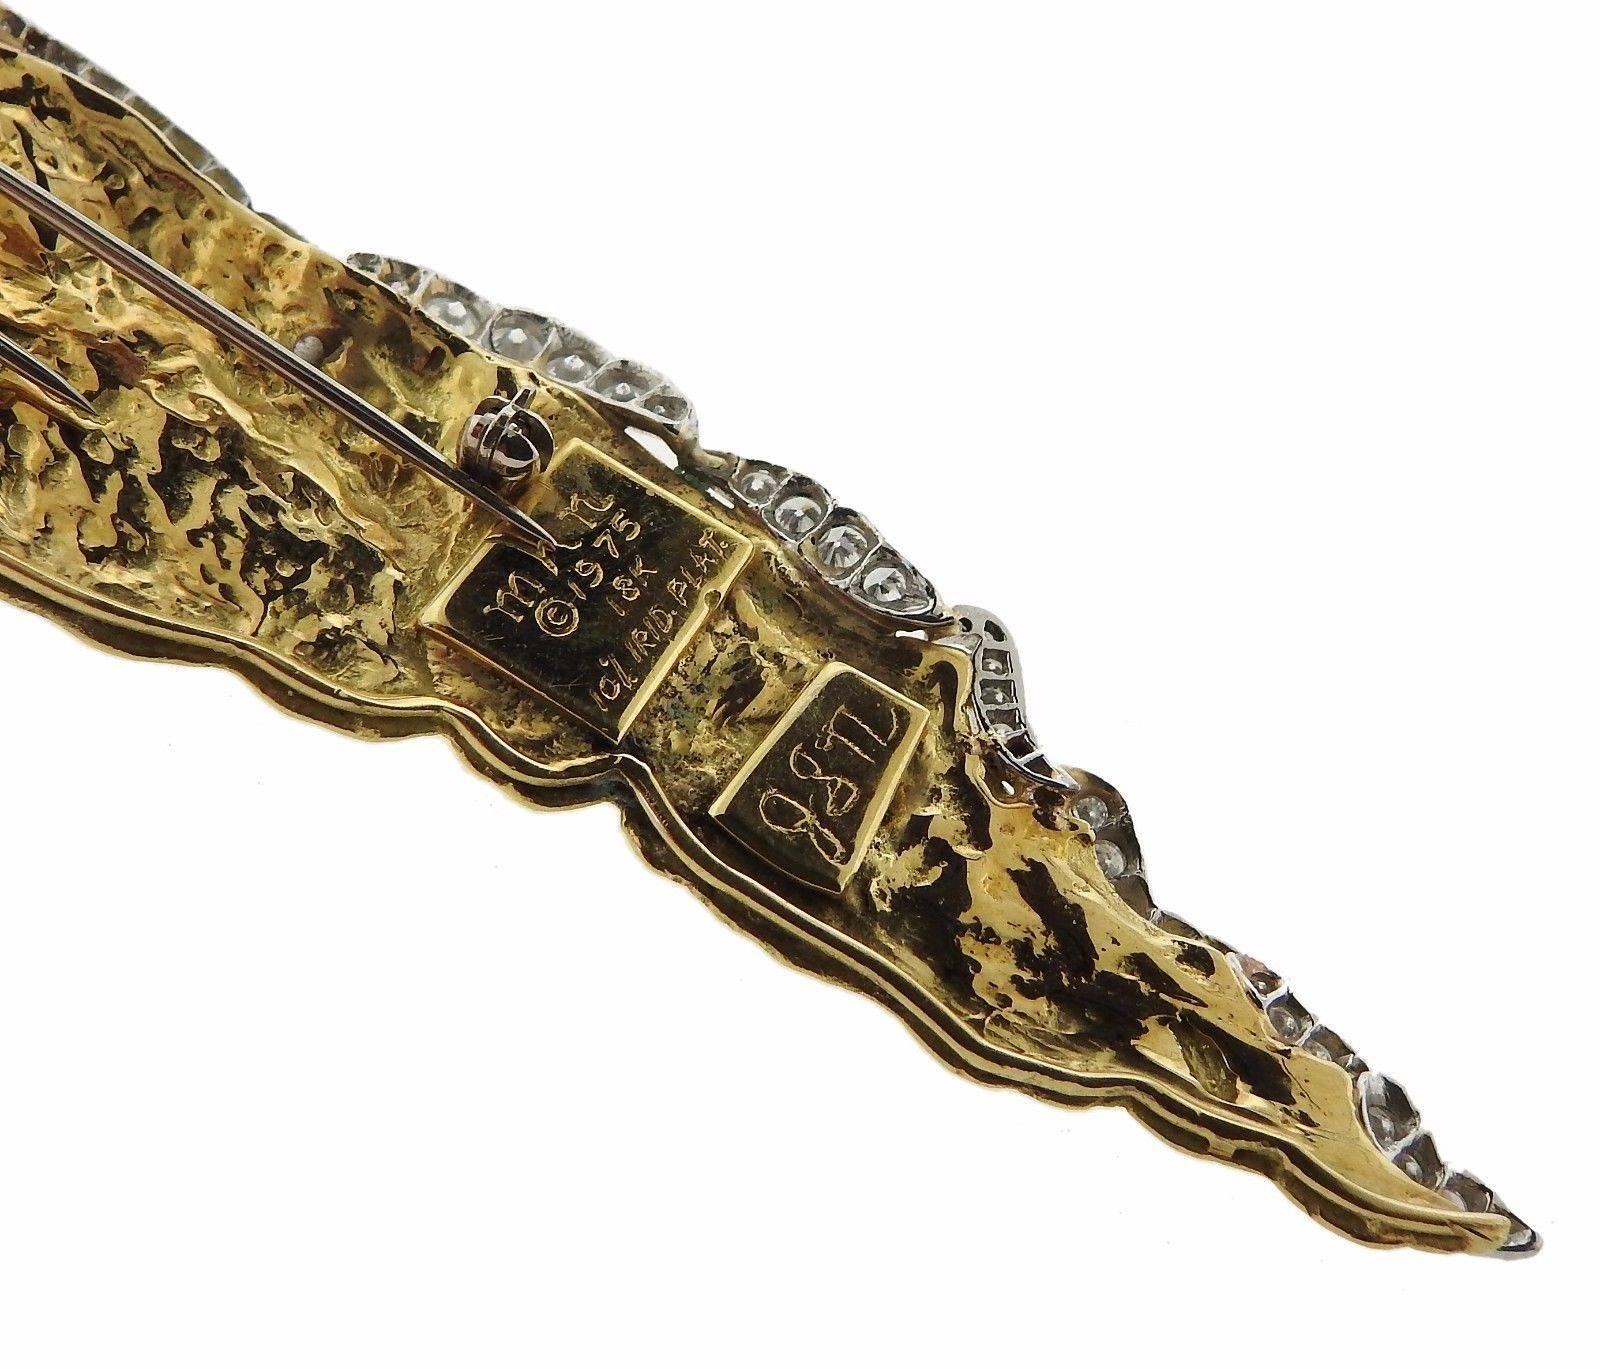 An 18k yellow gold and platinum brooch set with 4.40ctw of G/VS diamonds.  The brooch is 132mm x 28mm and weighs 36.3 grams. Marked: MHN,1975, 18k, 10% irid. plat.